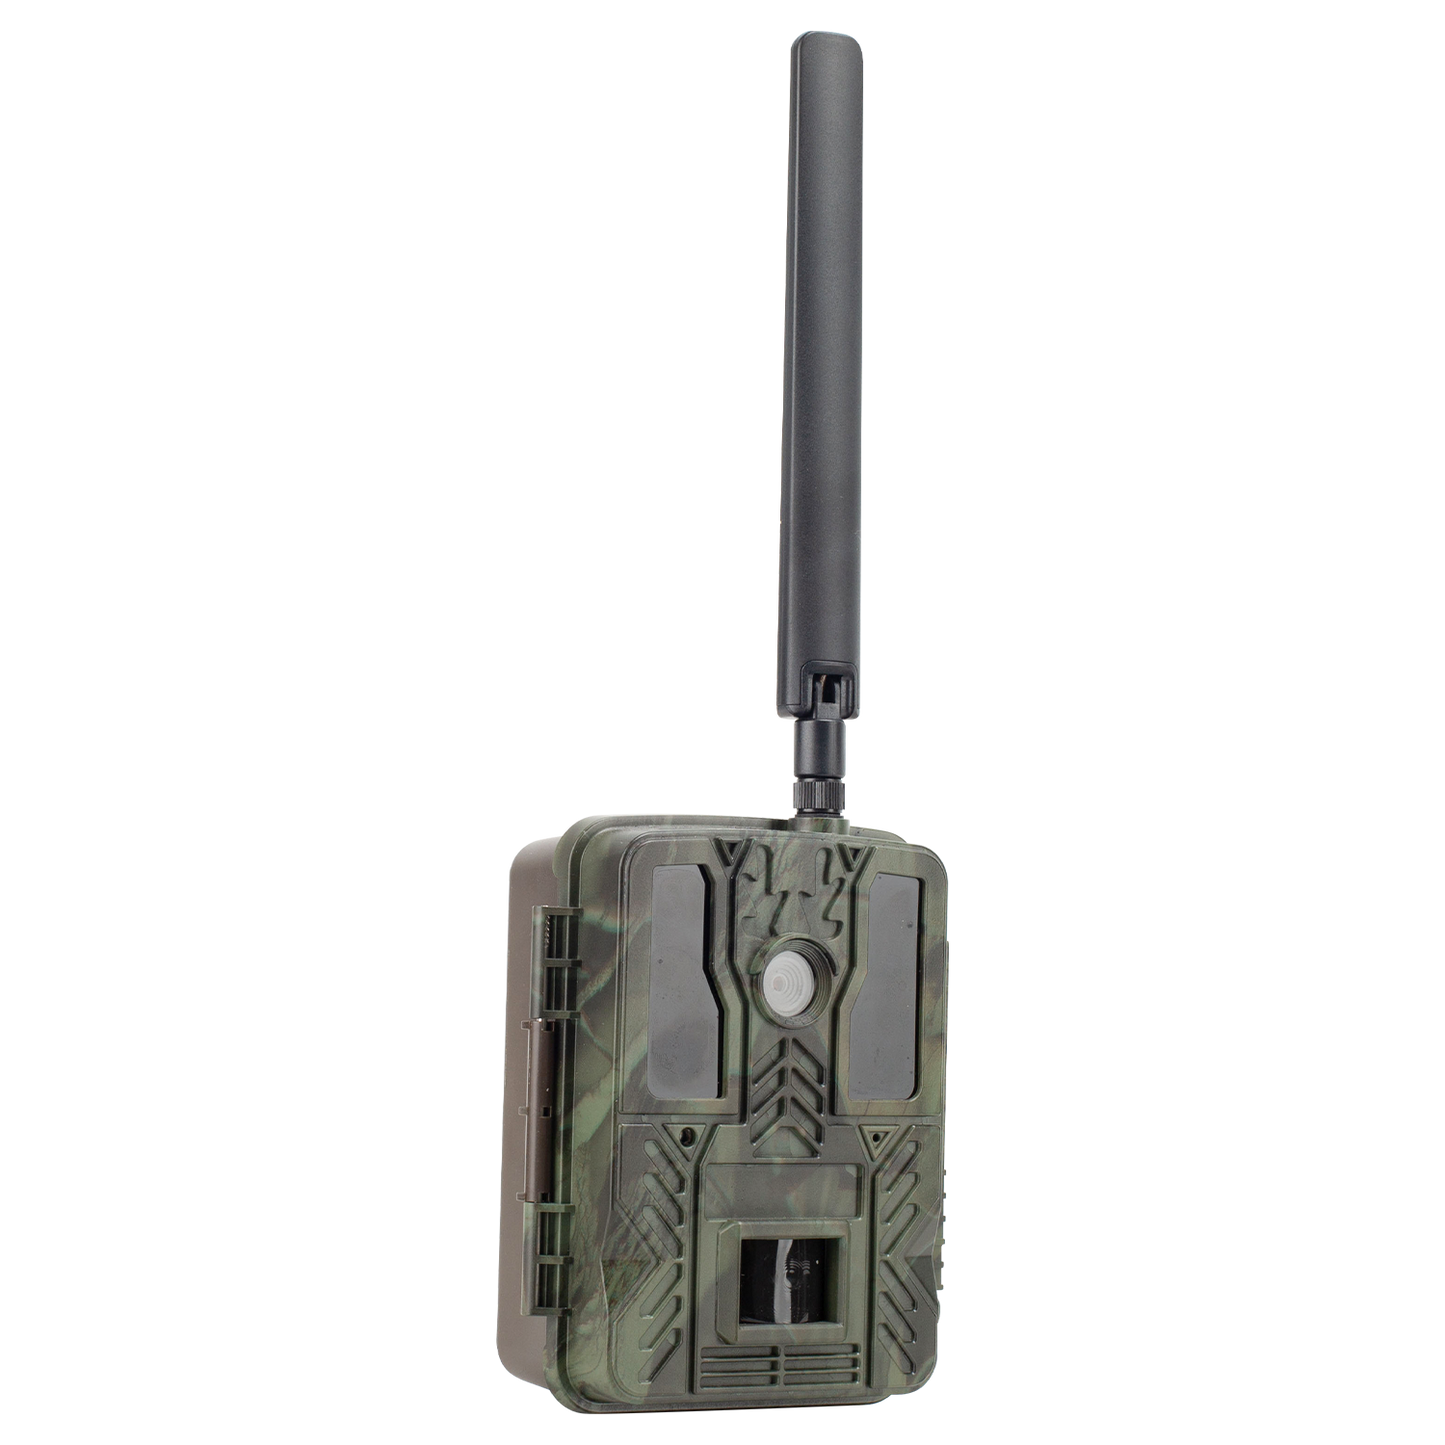 Coolife BST880 4G Trail Camera